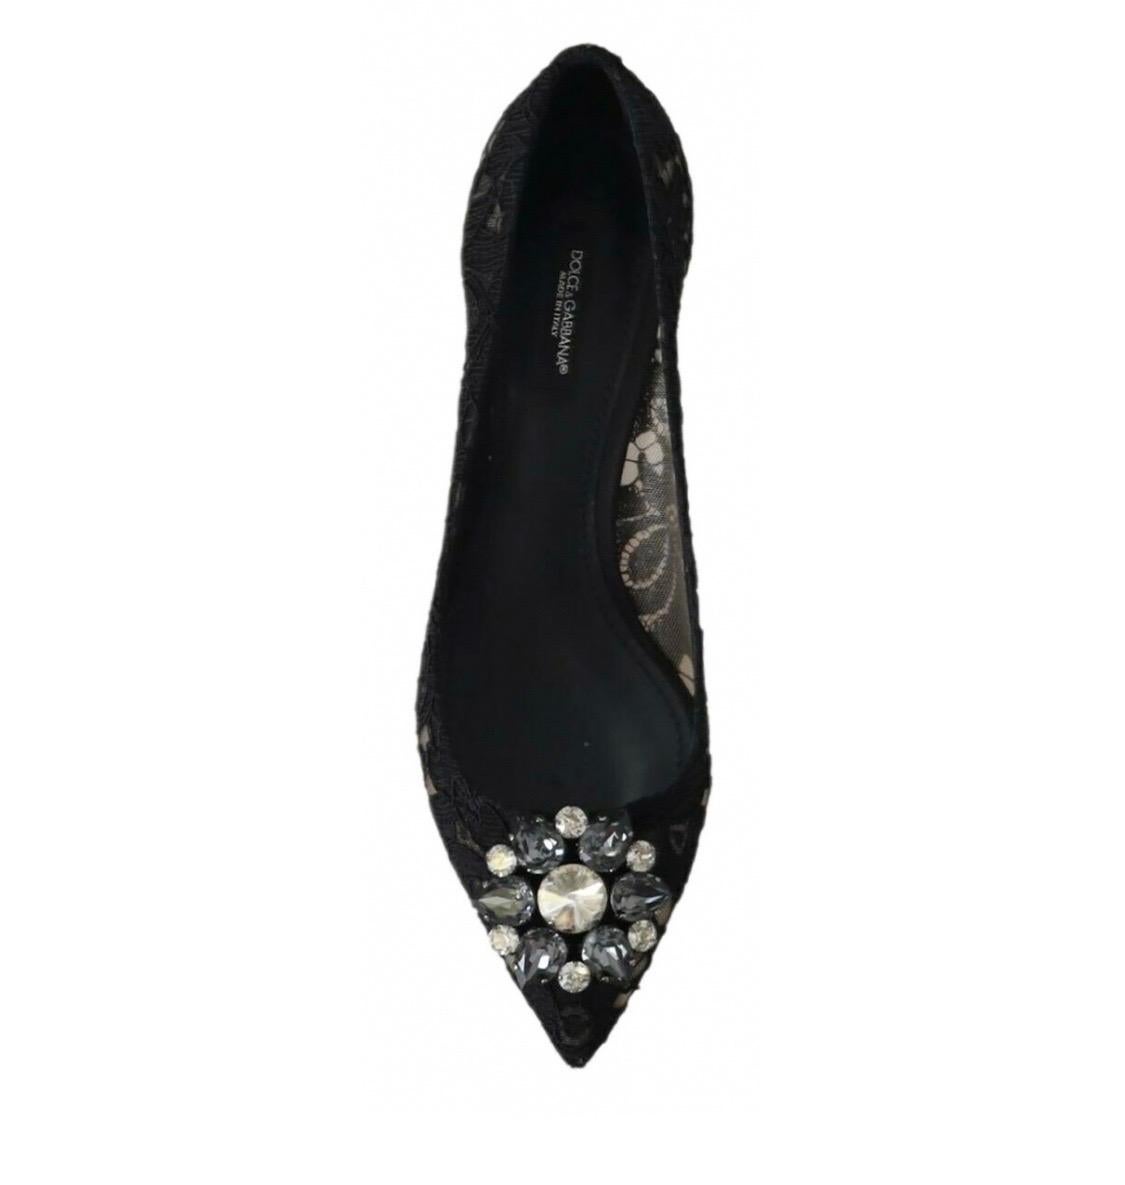 Women's Dolce & Gabbana black  PUMP lace shoes with jewel
detail on the top heels 